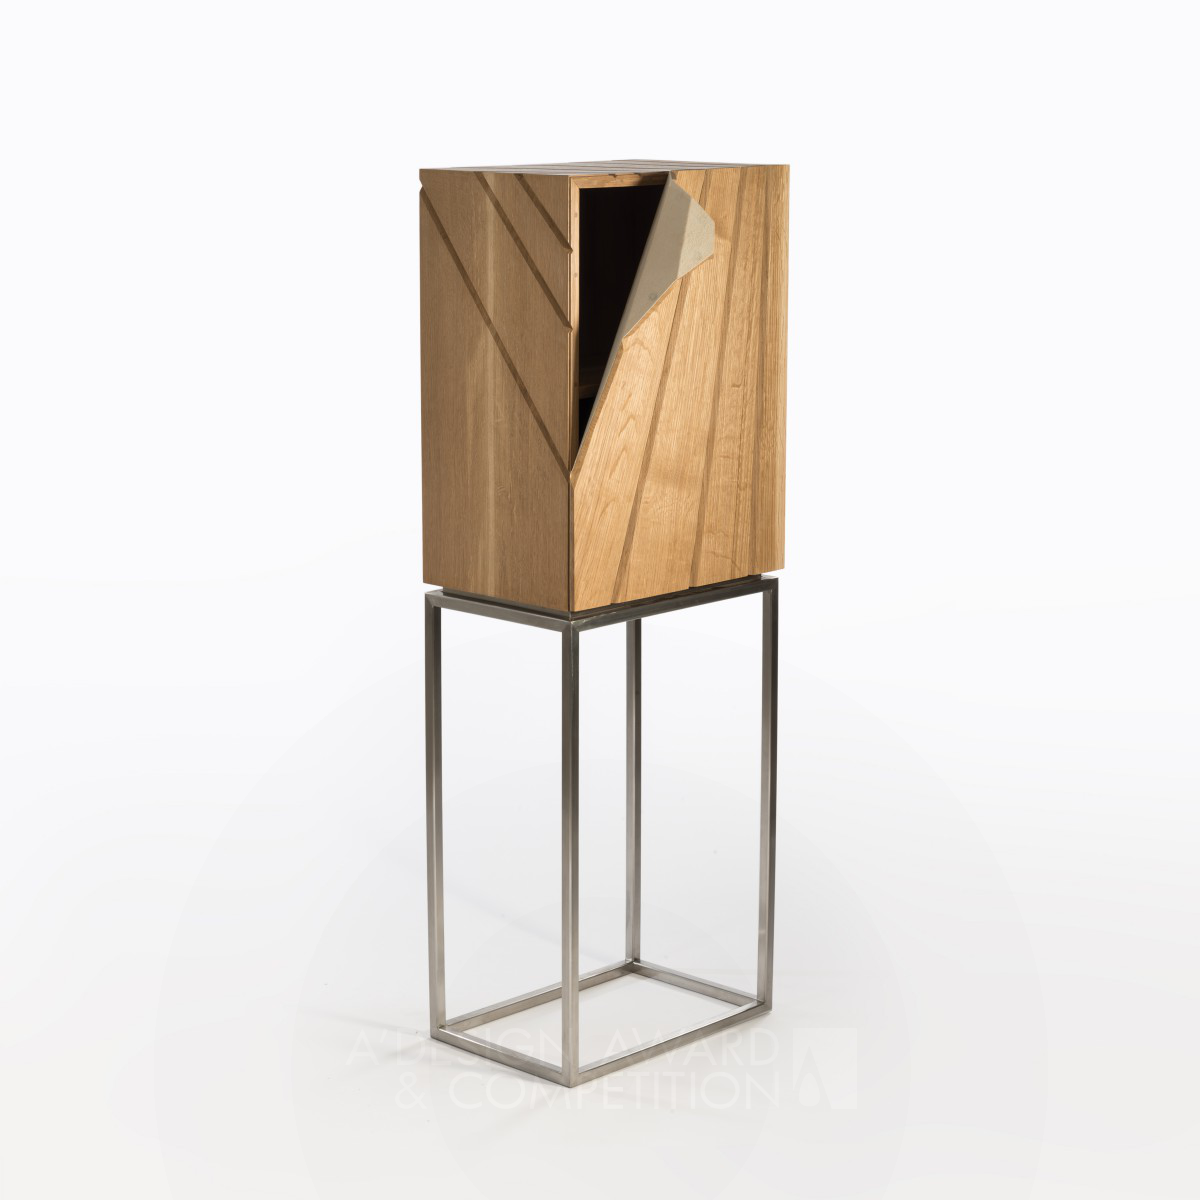 Peel Cabinet by Leah K. S. Amick